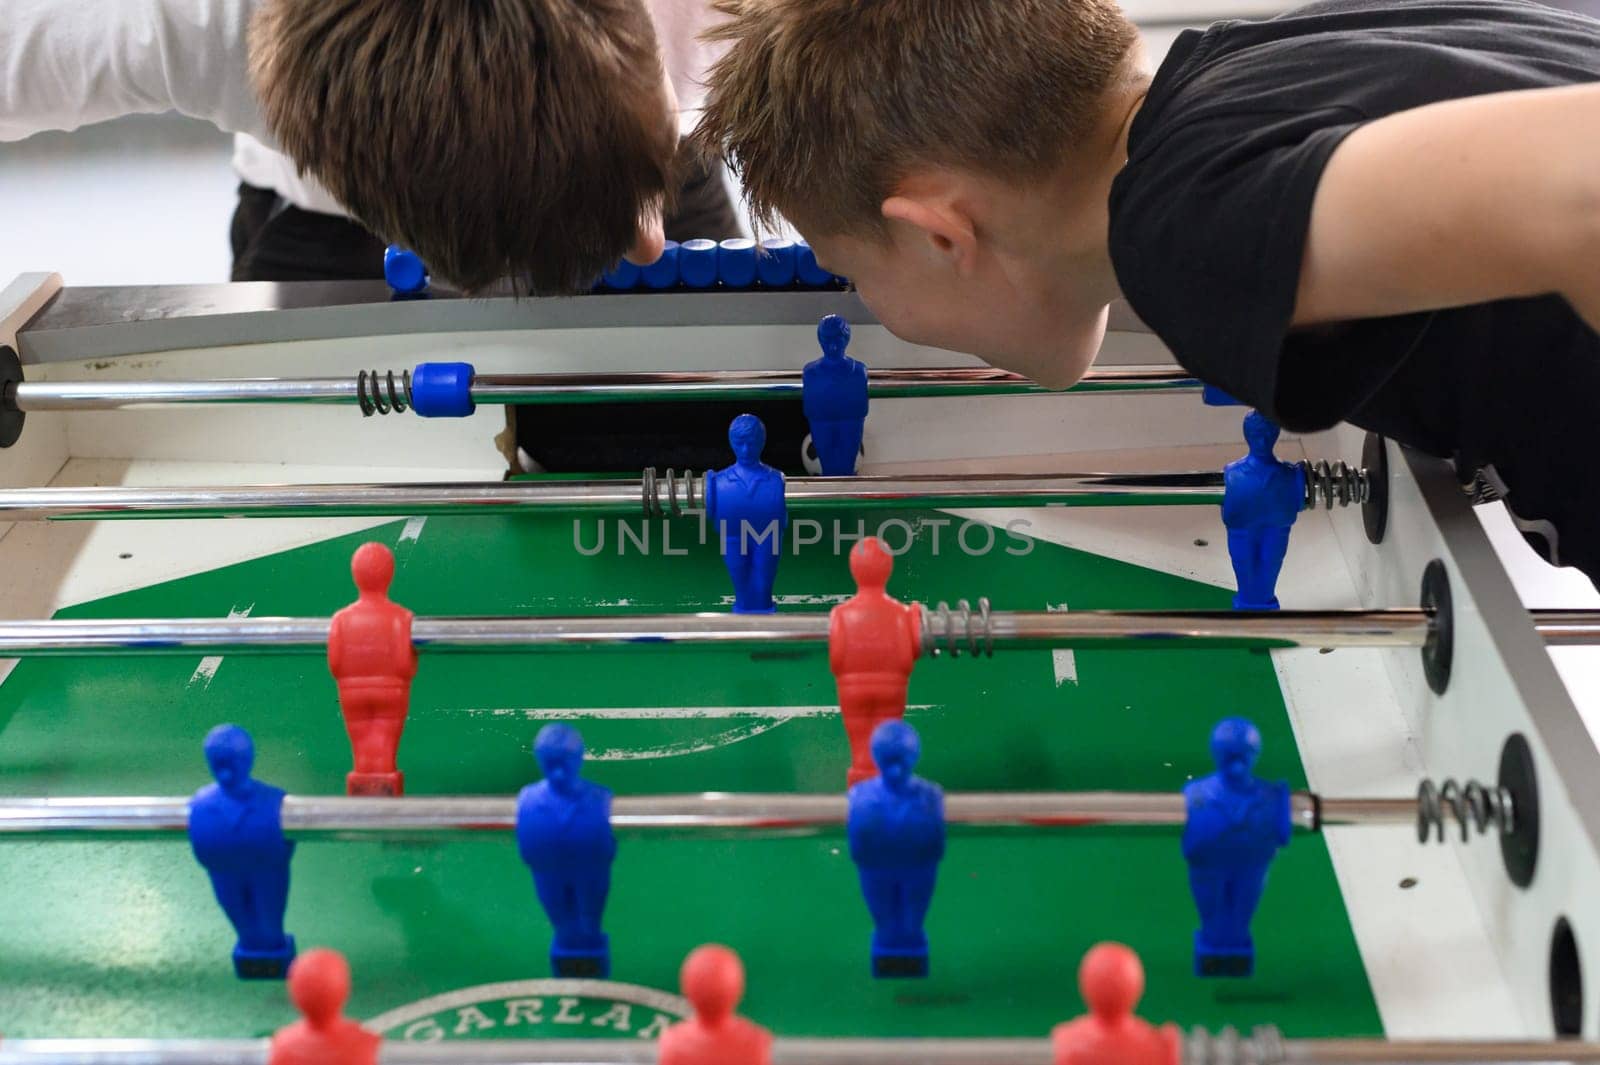 Active recreation in the game room, children play table football, active game for children.